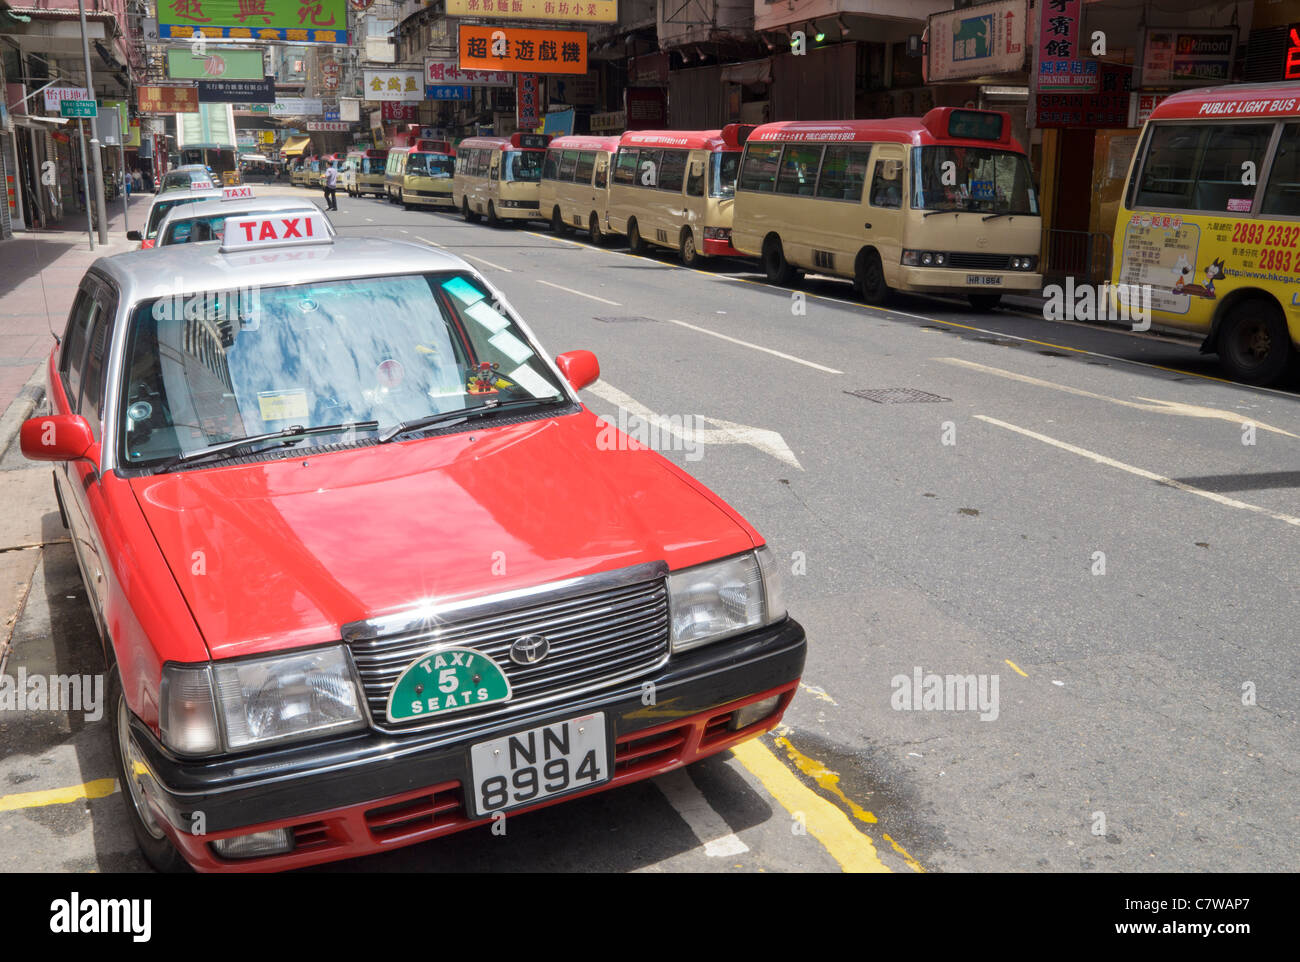 Hong Kong taxis and minibuses in Kowloon Stock Photo